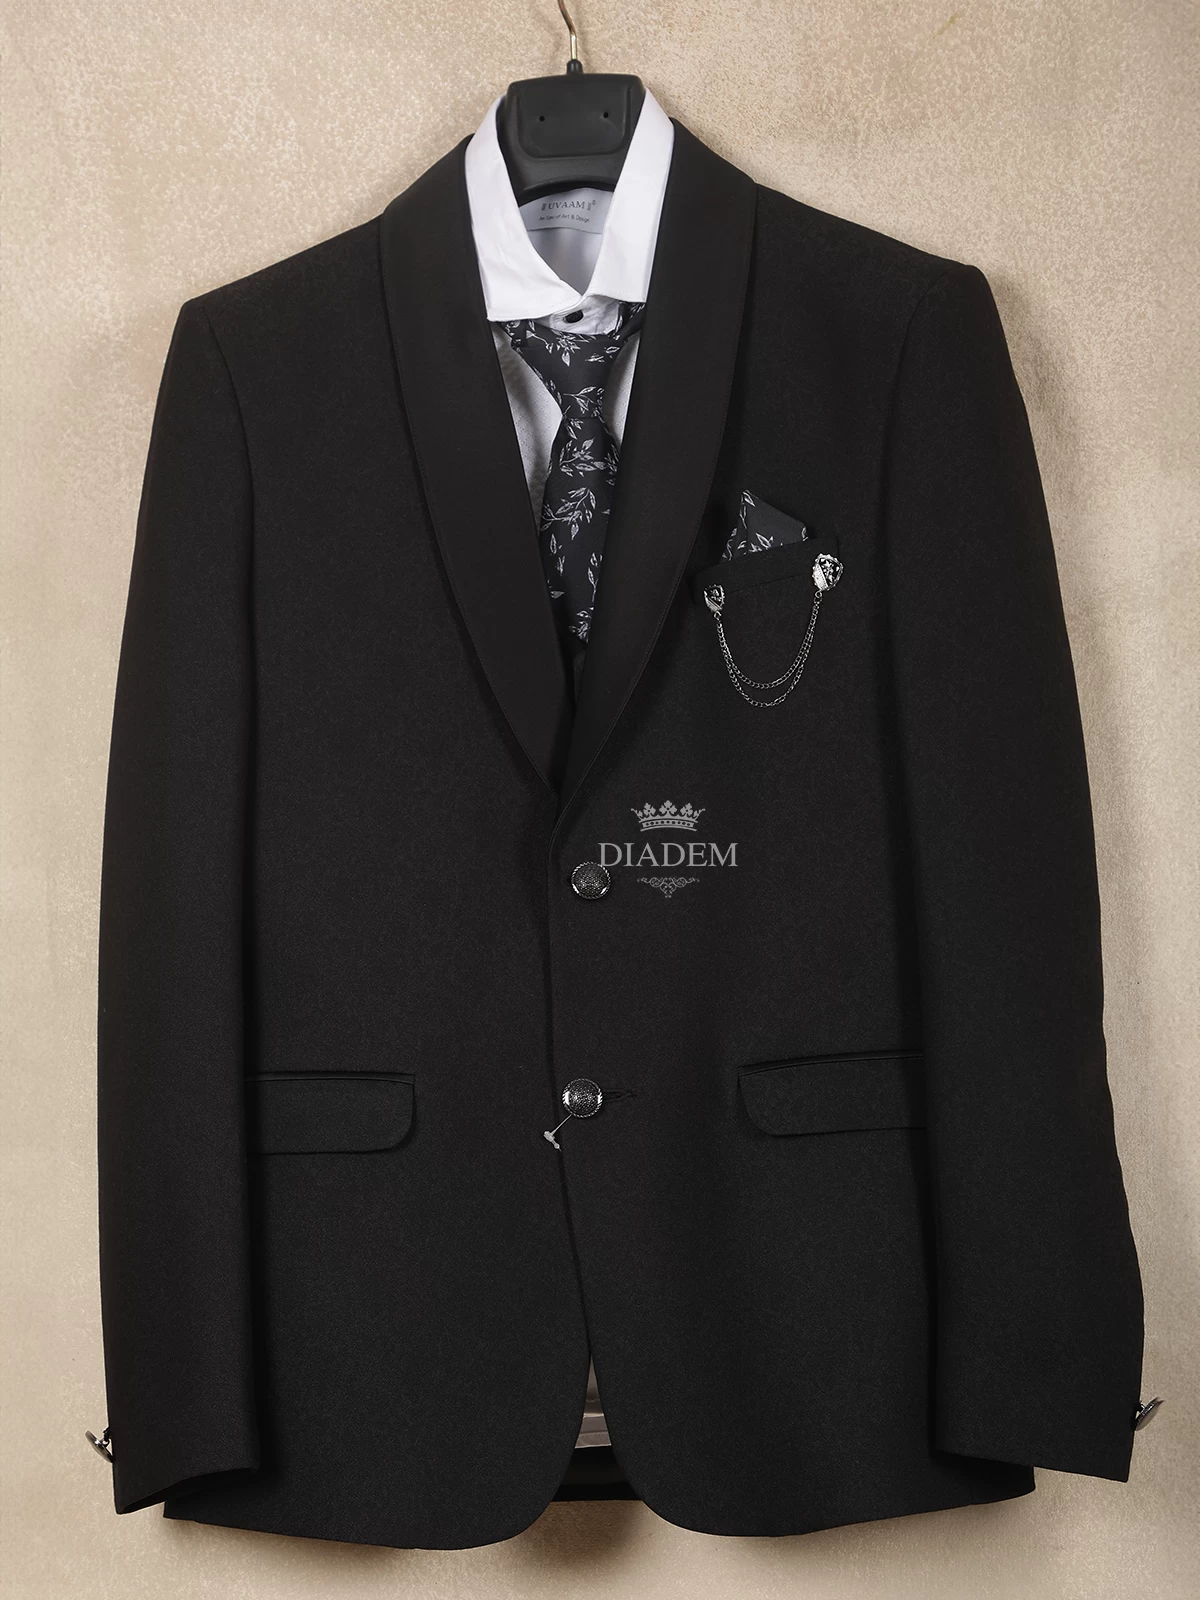 Black Cotton Blend Coat Suit Paired With Matching Tie And Brooch